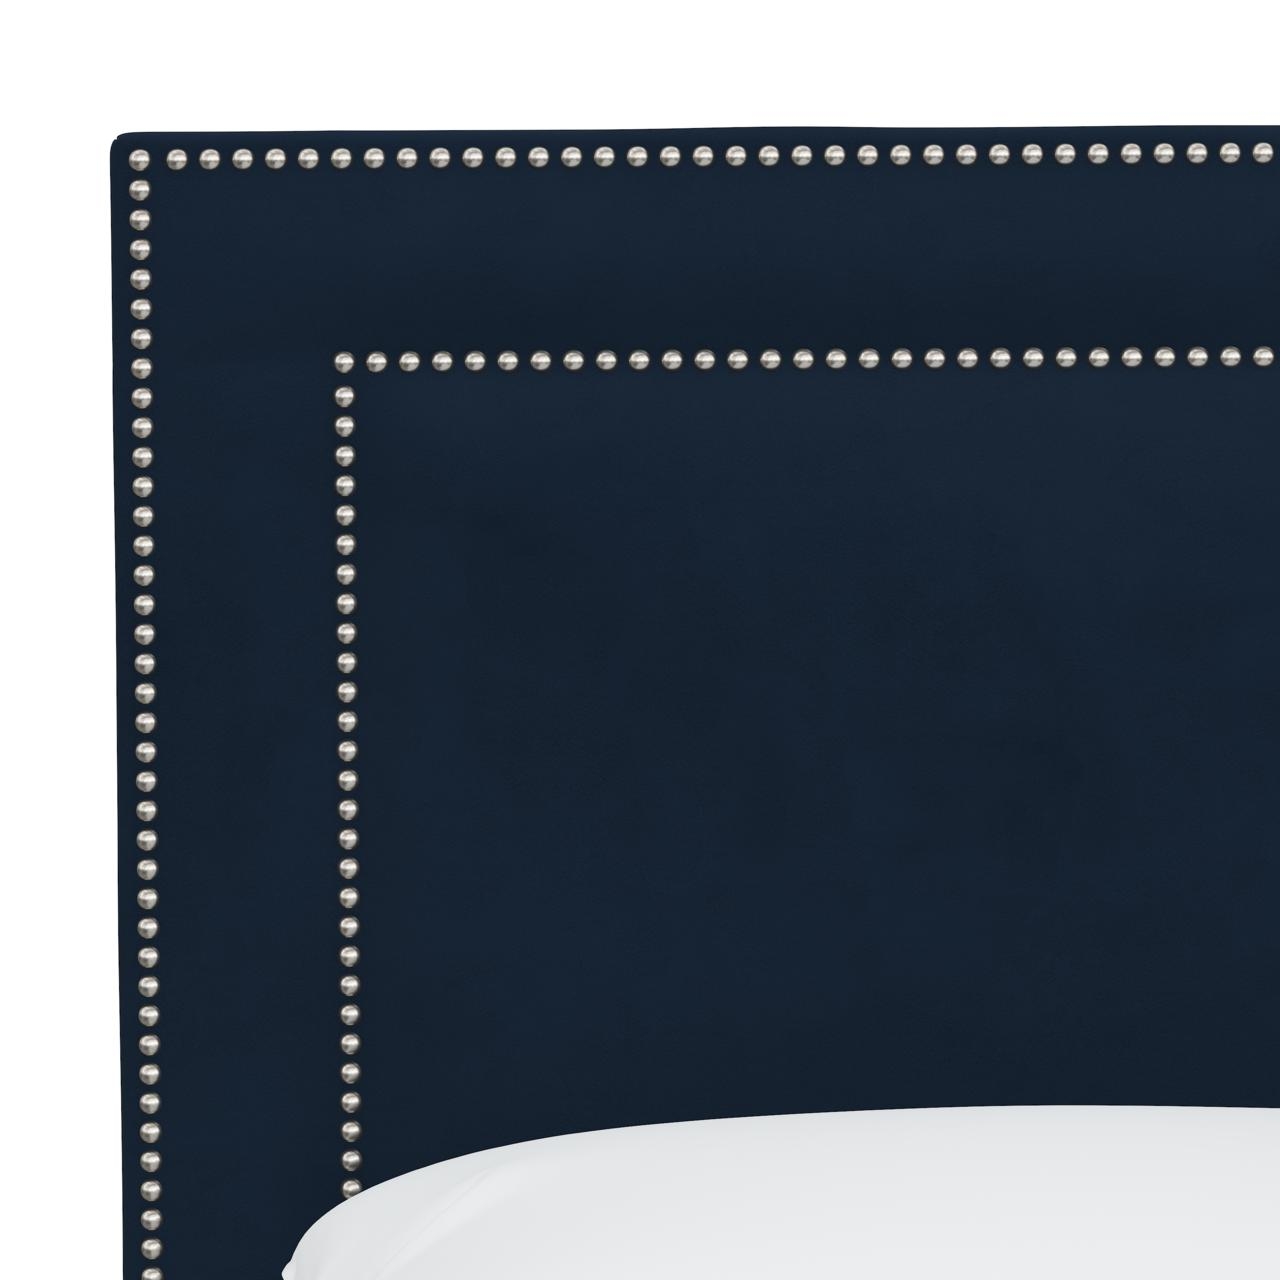 Williams Bed, Queen, Velvet Ink, Pewter Nailheads - Image 3